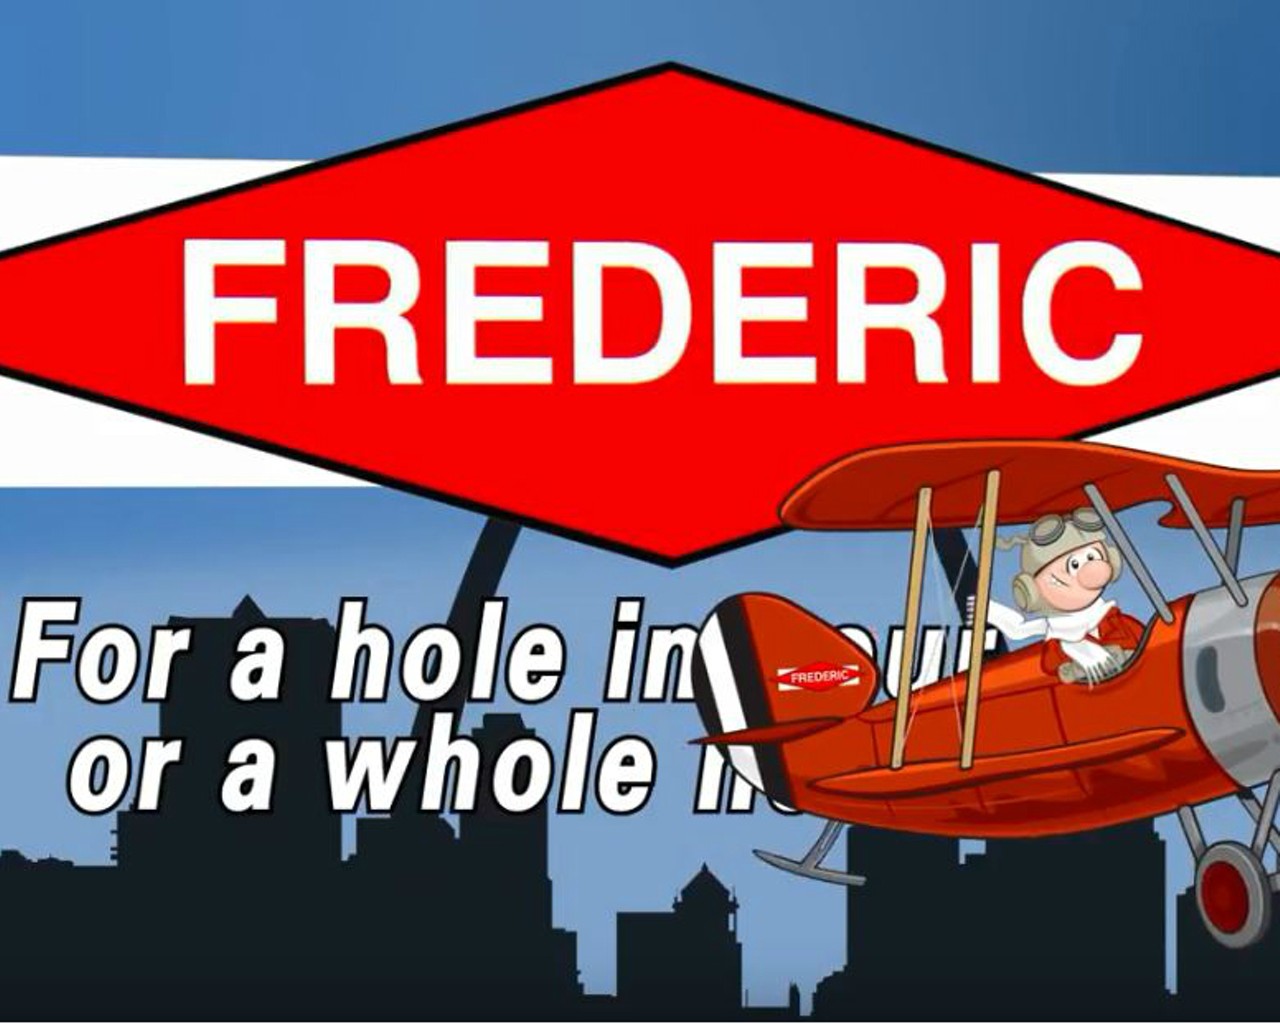 Frederic Roofing
"For a hole in your roof or a whole new roof: Frederick Roofing." You can't help but to sing the jingle. Even local musician Tommy Hallorann had to give it props.
Photo courtesy of YouTube